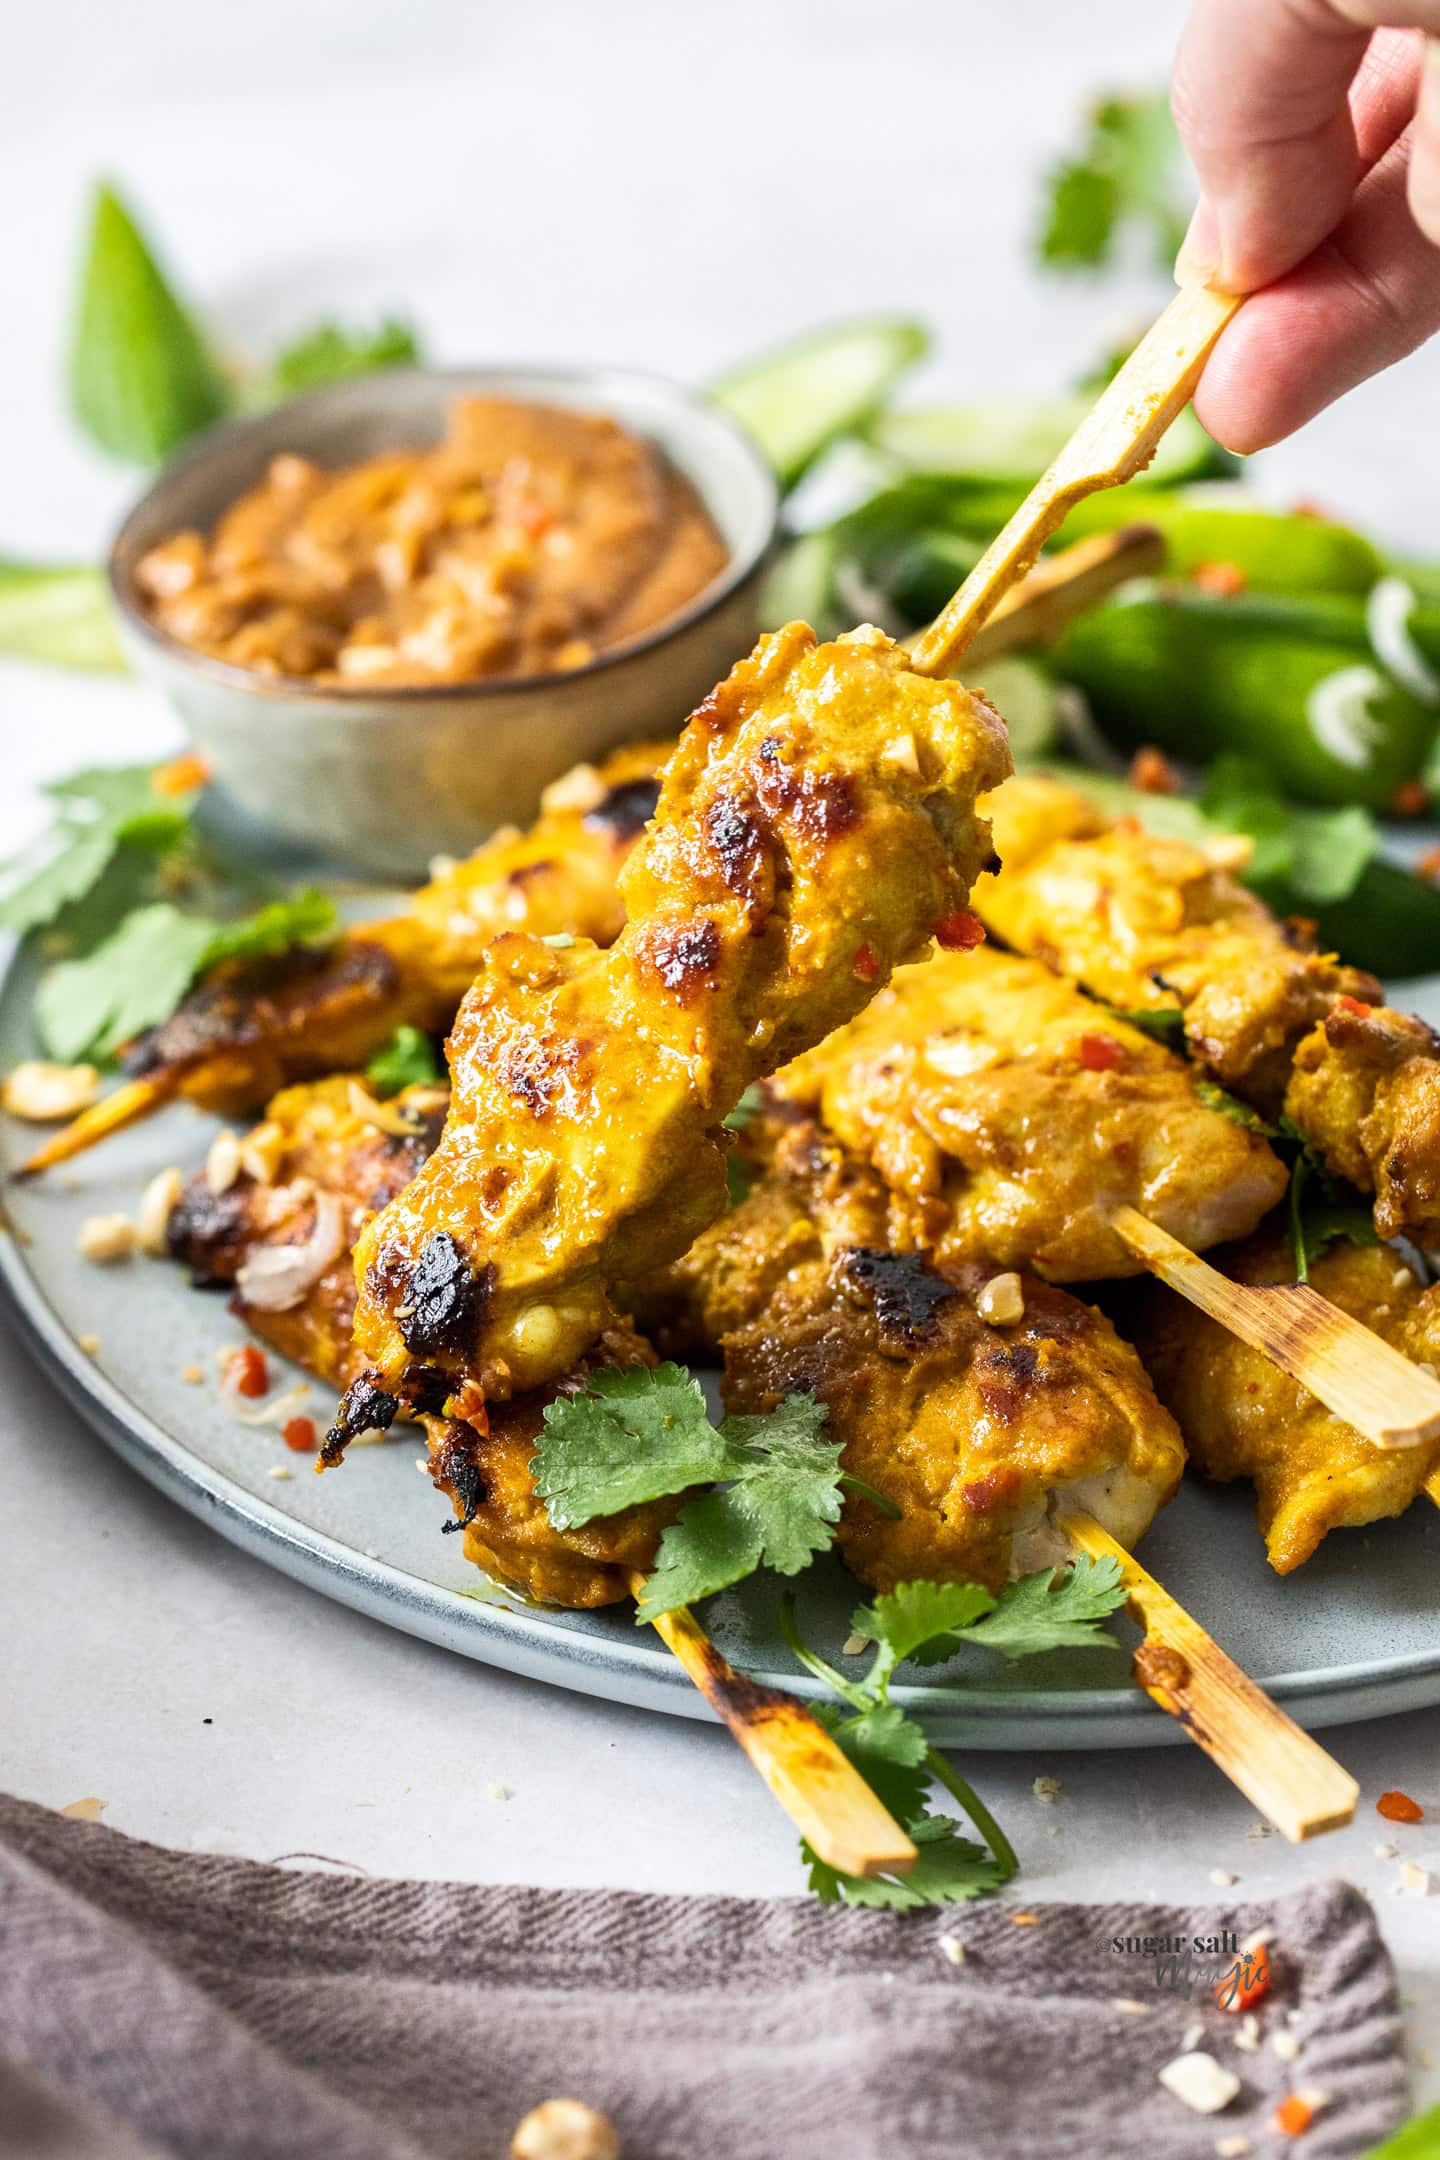 Chicken satay on a bamboo skewer.